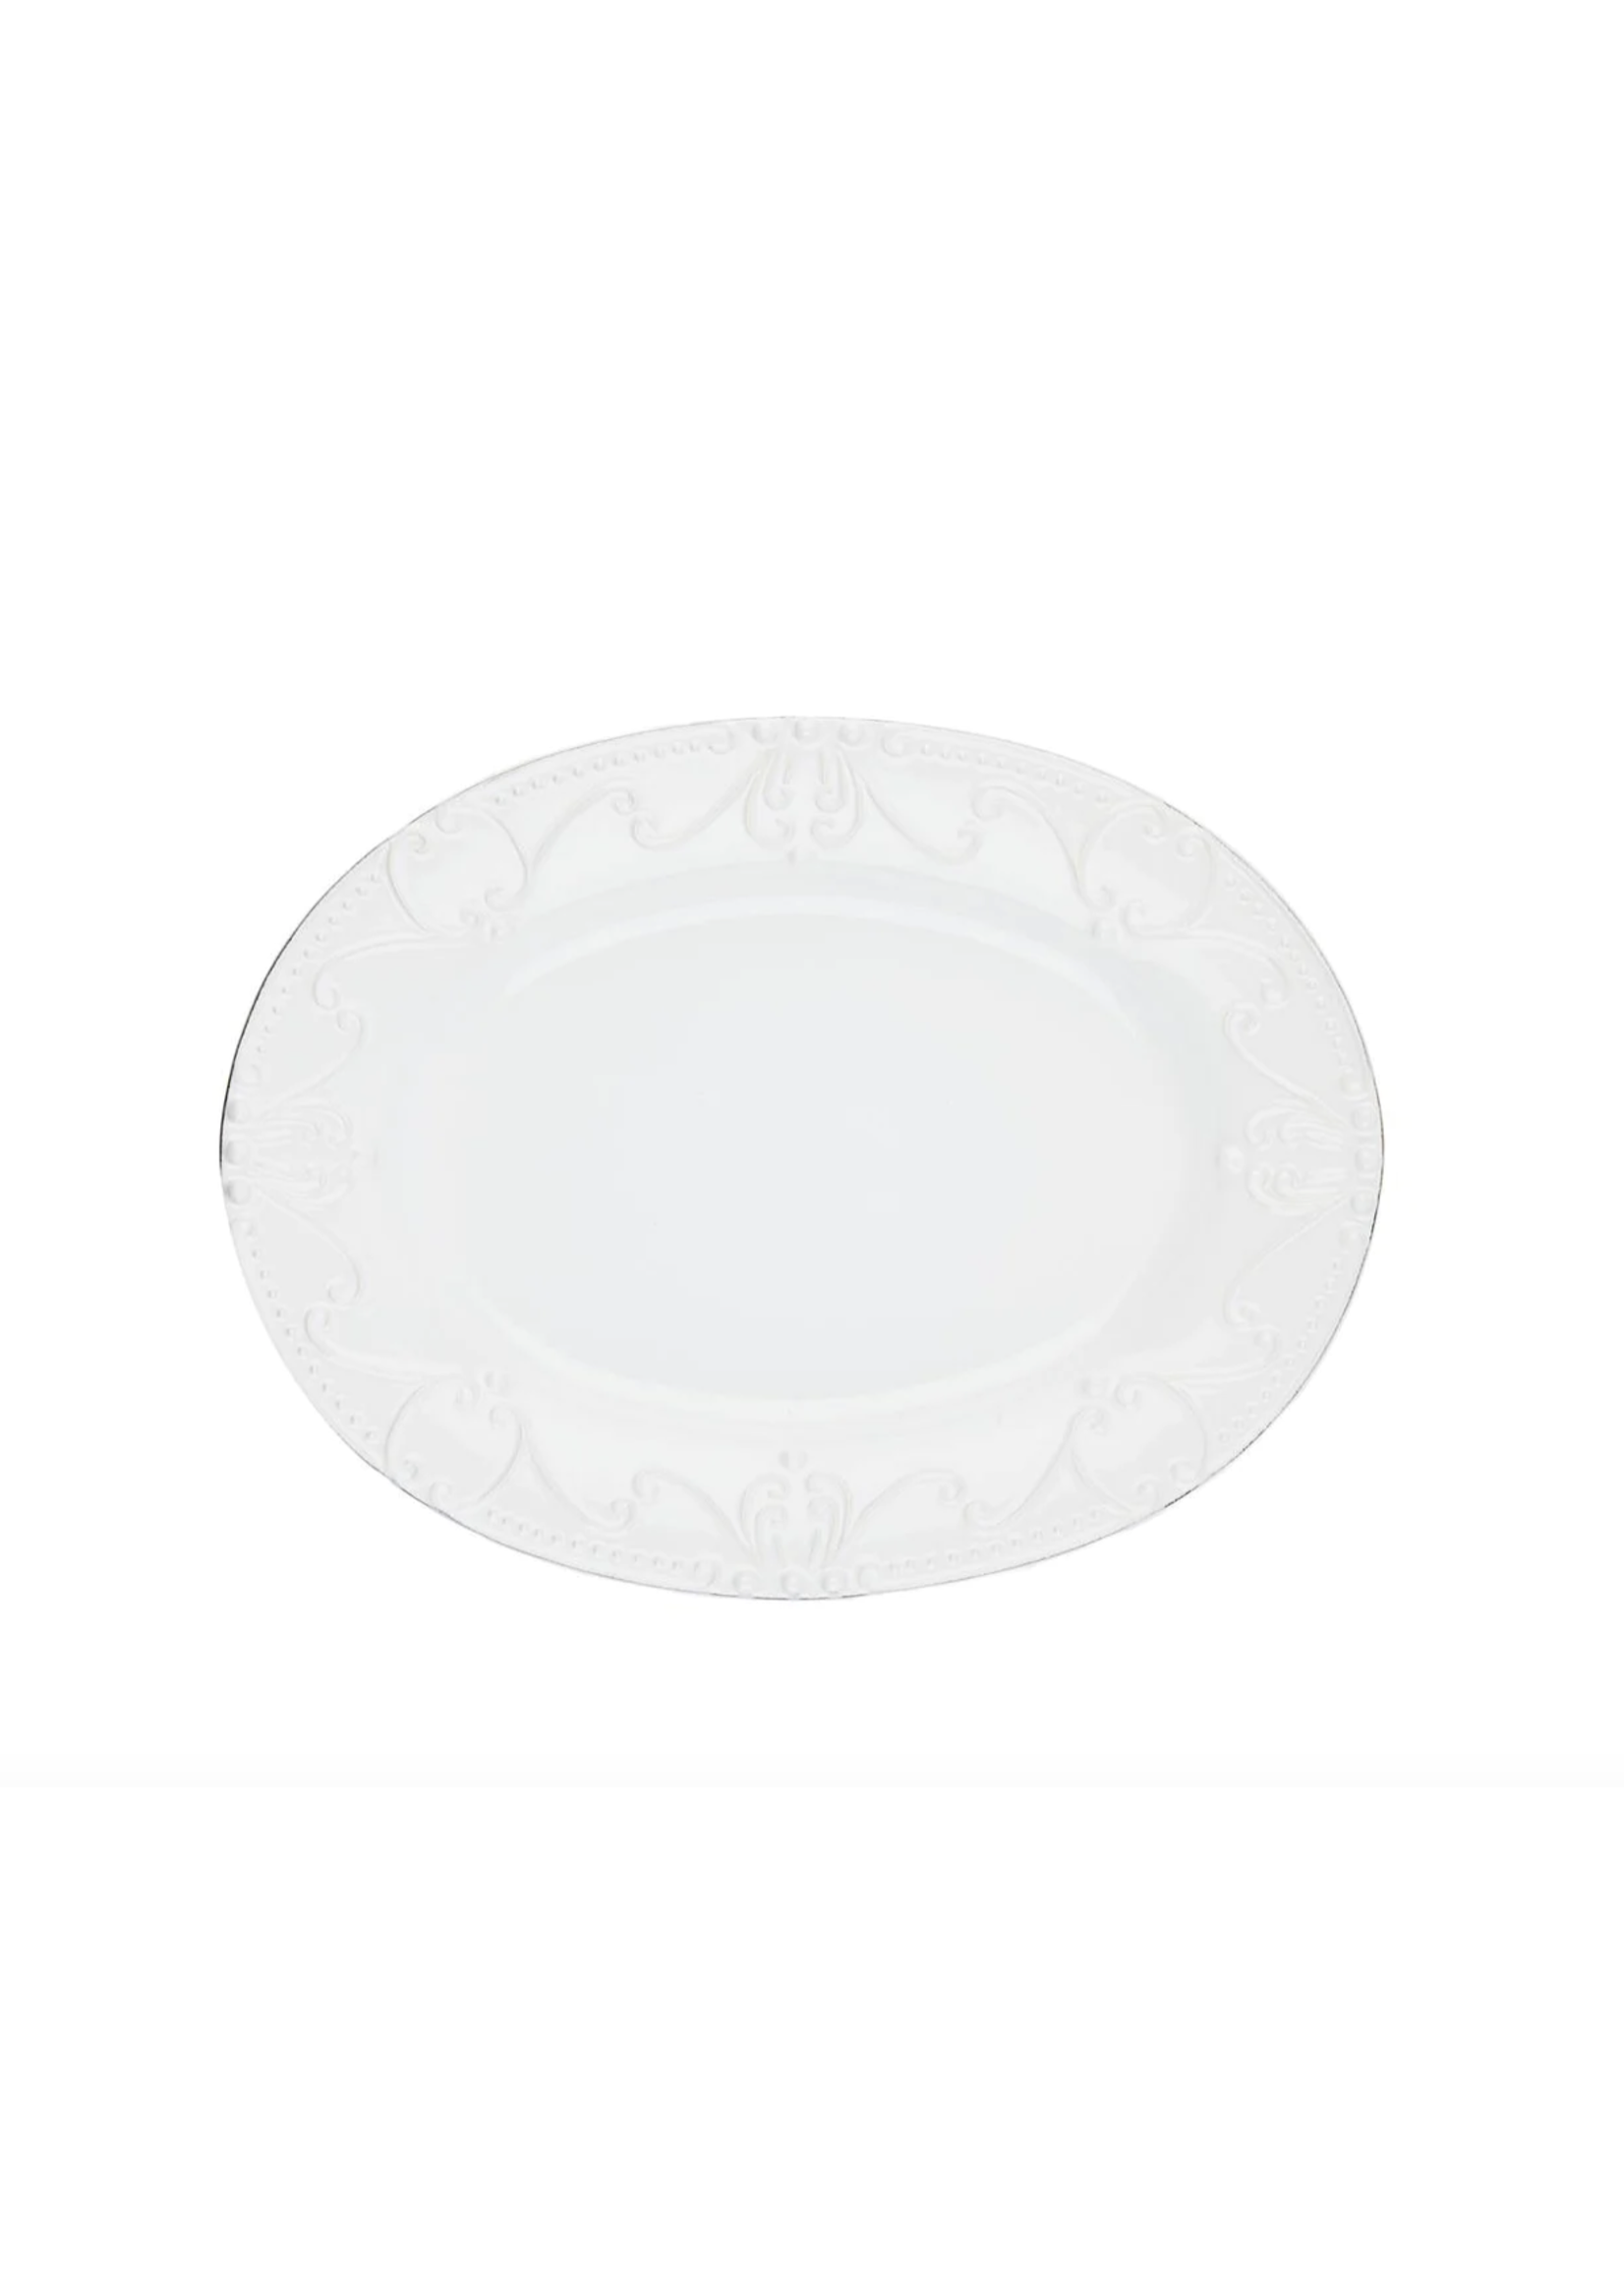 Skyros Designs Isabella Pure White Oval Platter